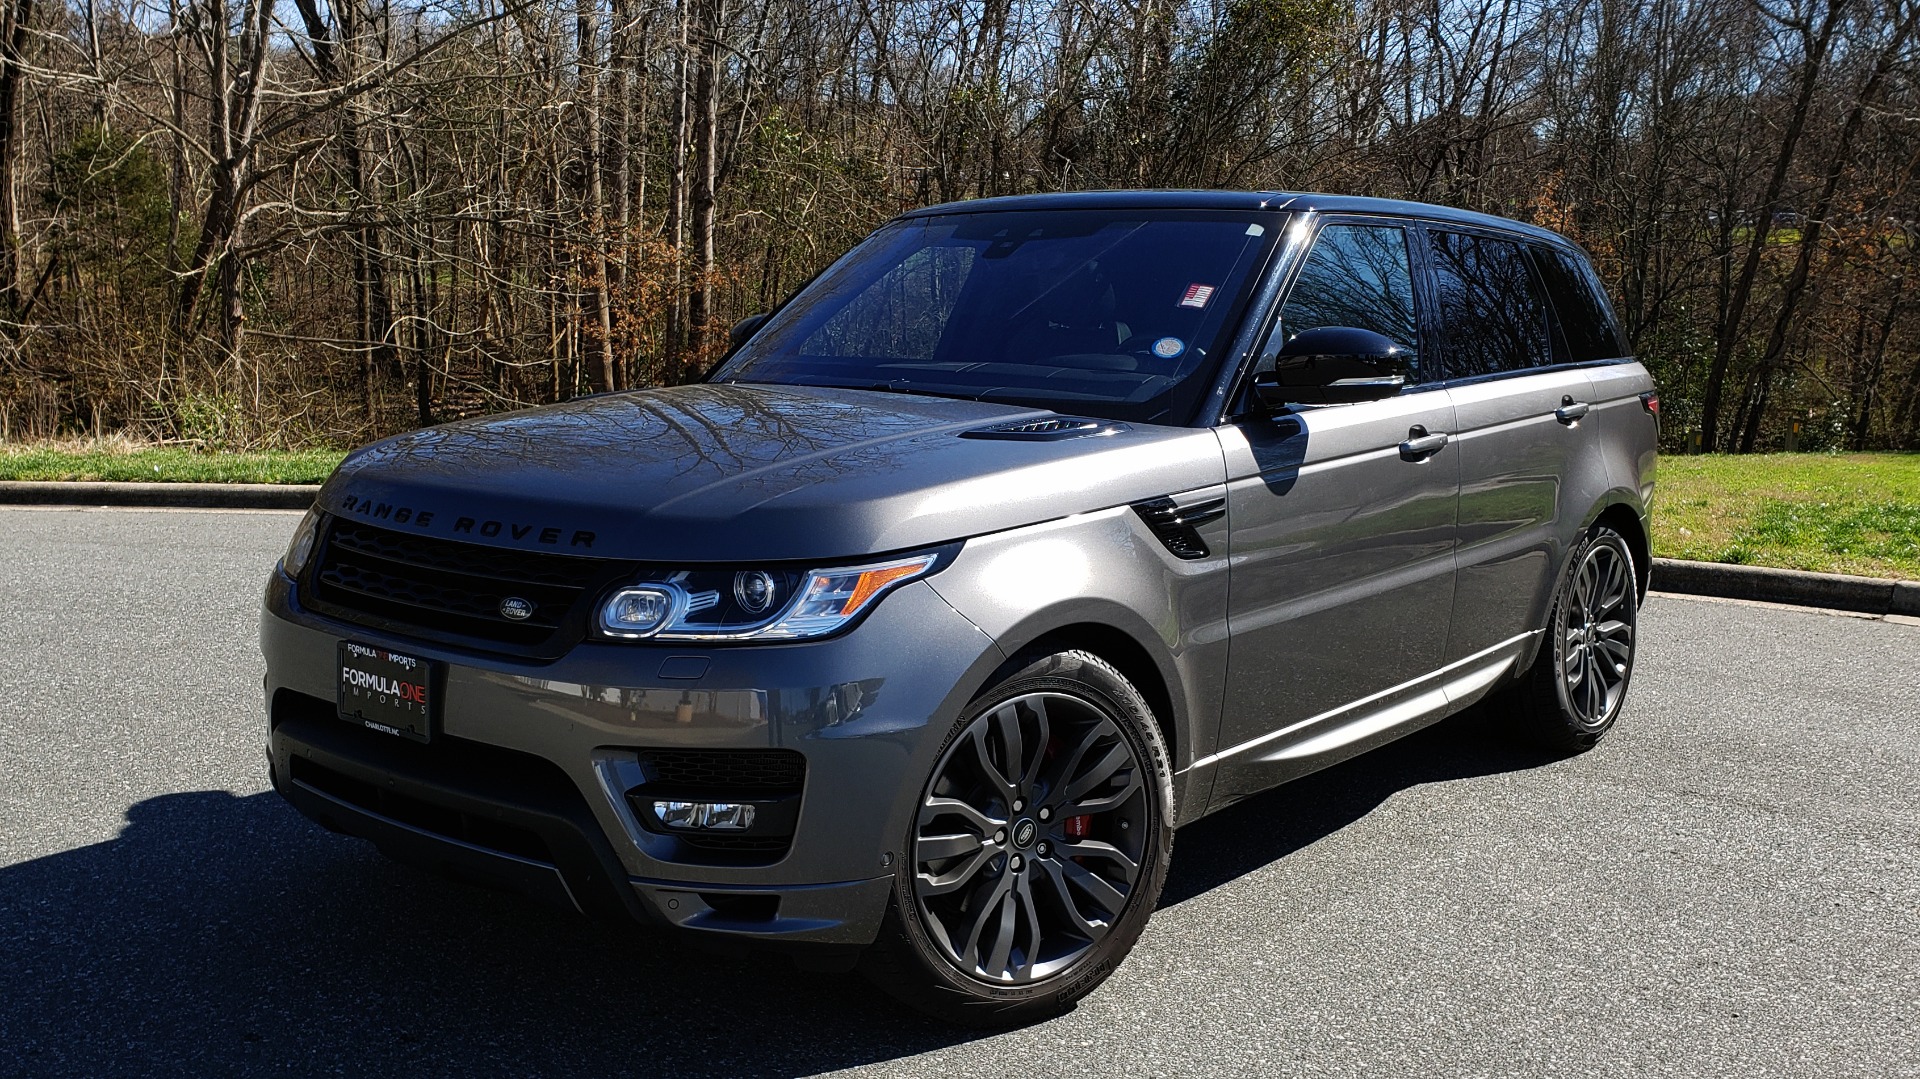 Used 2017 Land Rover RANGE ROVER SPORT HSE DYNAMIC / NAV / SUNROOF / REARVIEW for sale Sold at Formula Imports in Charlotte NC 28227 1